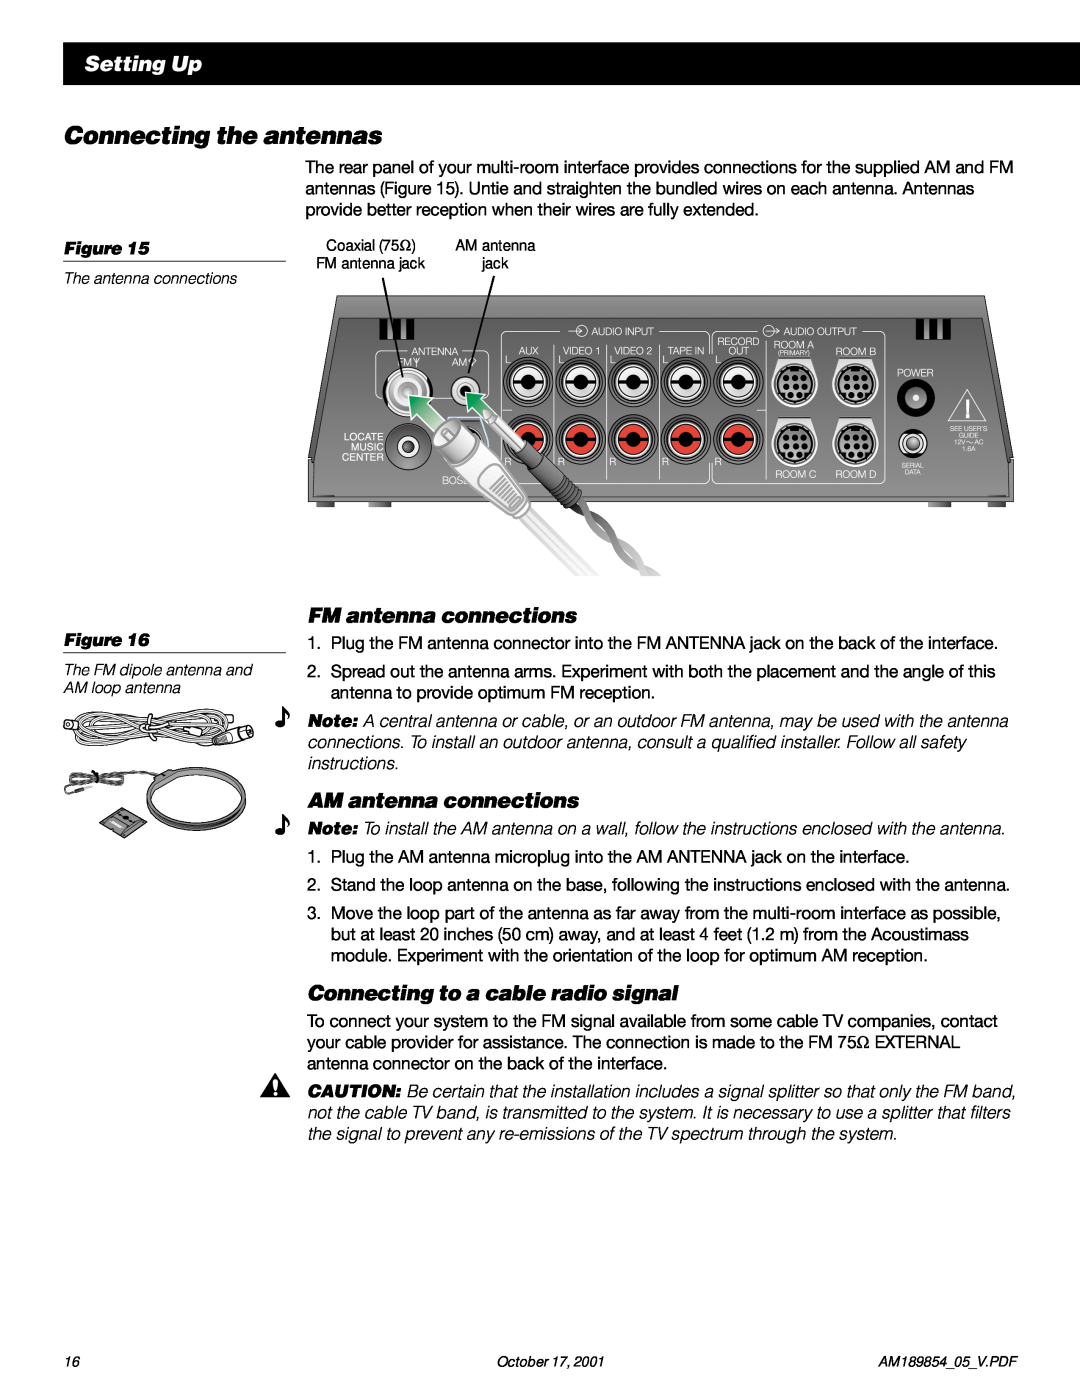 Bose 50 manual Setting Up, FM antenna connections, AM antenna connections, Connecting to a cable radio signal 